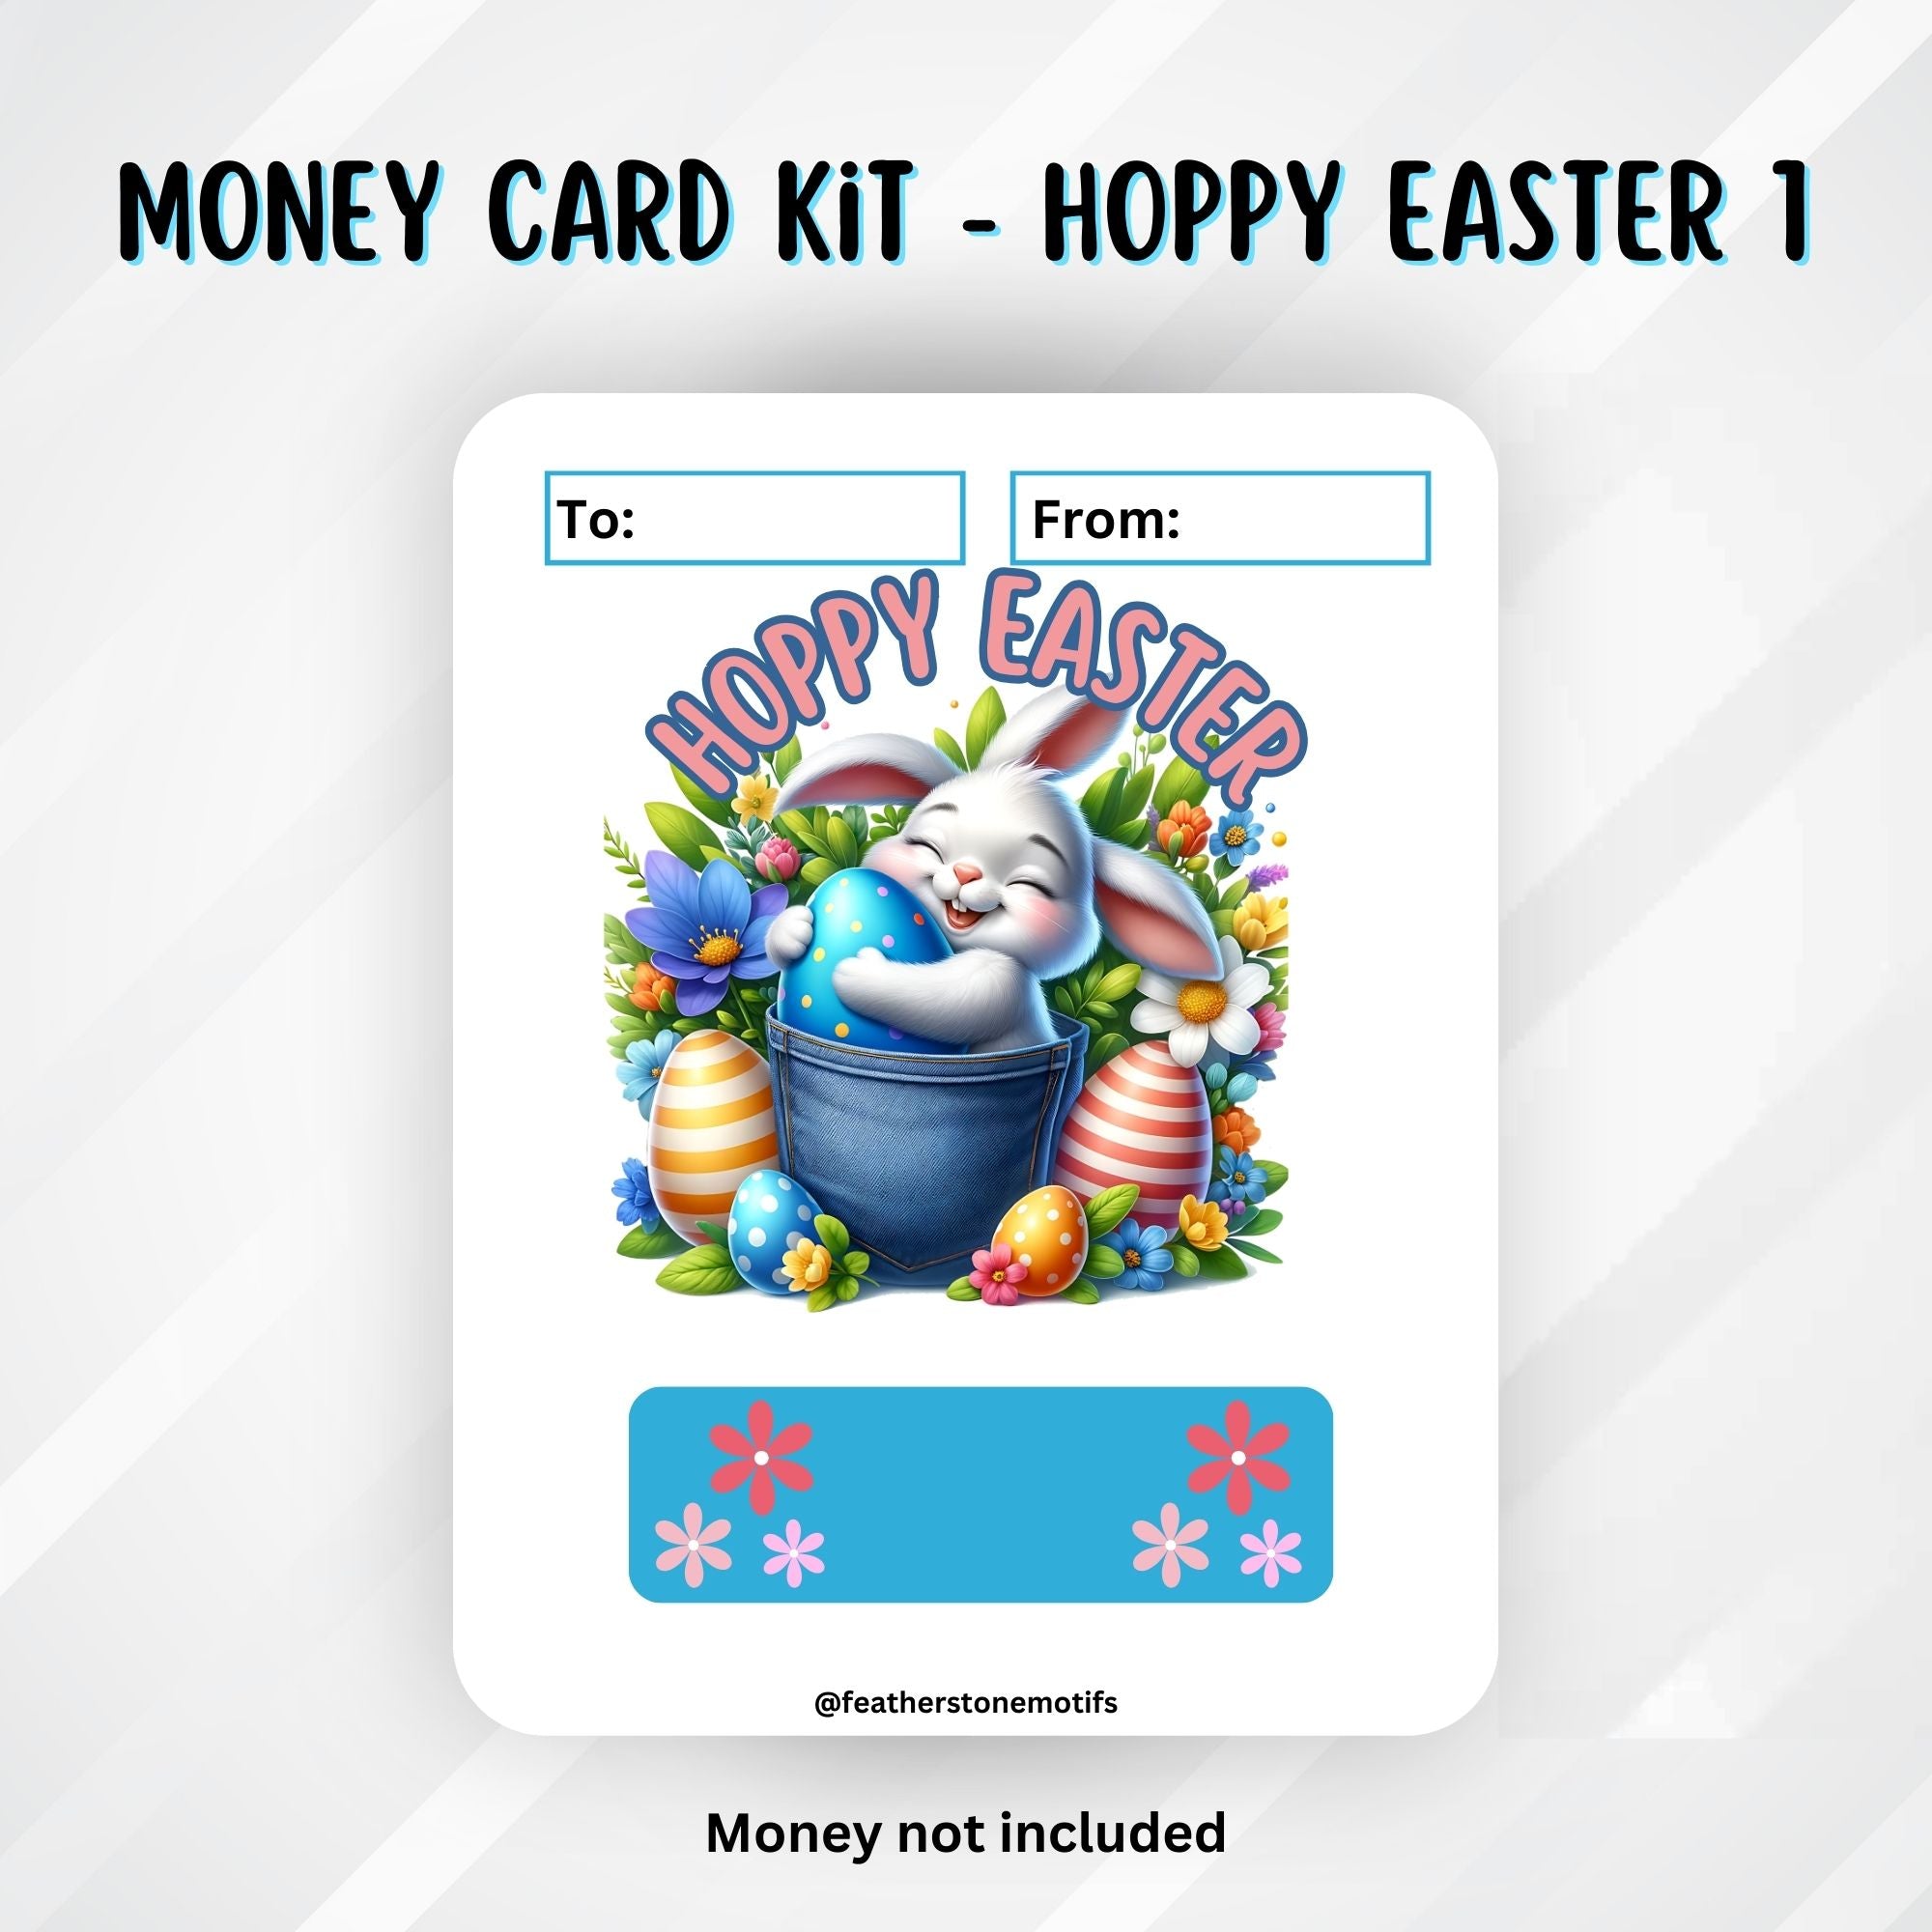 This image shows the Hoppy Easter 1 Easter Money Card without the money tube.